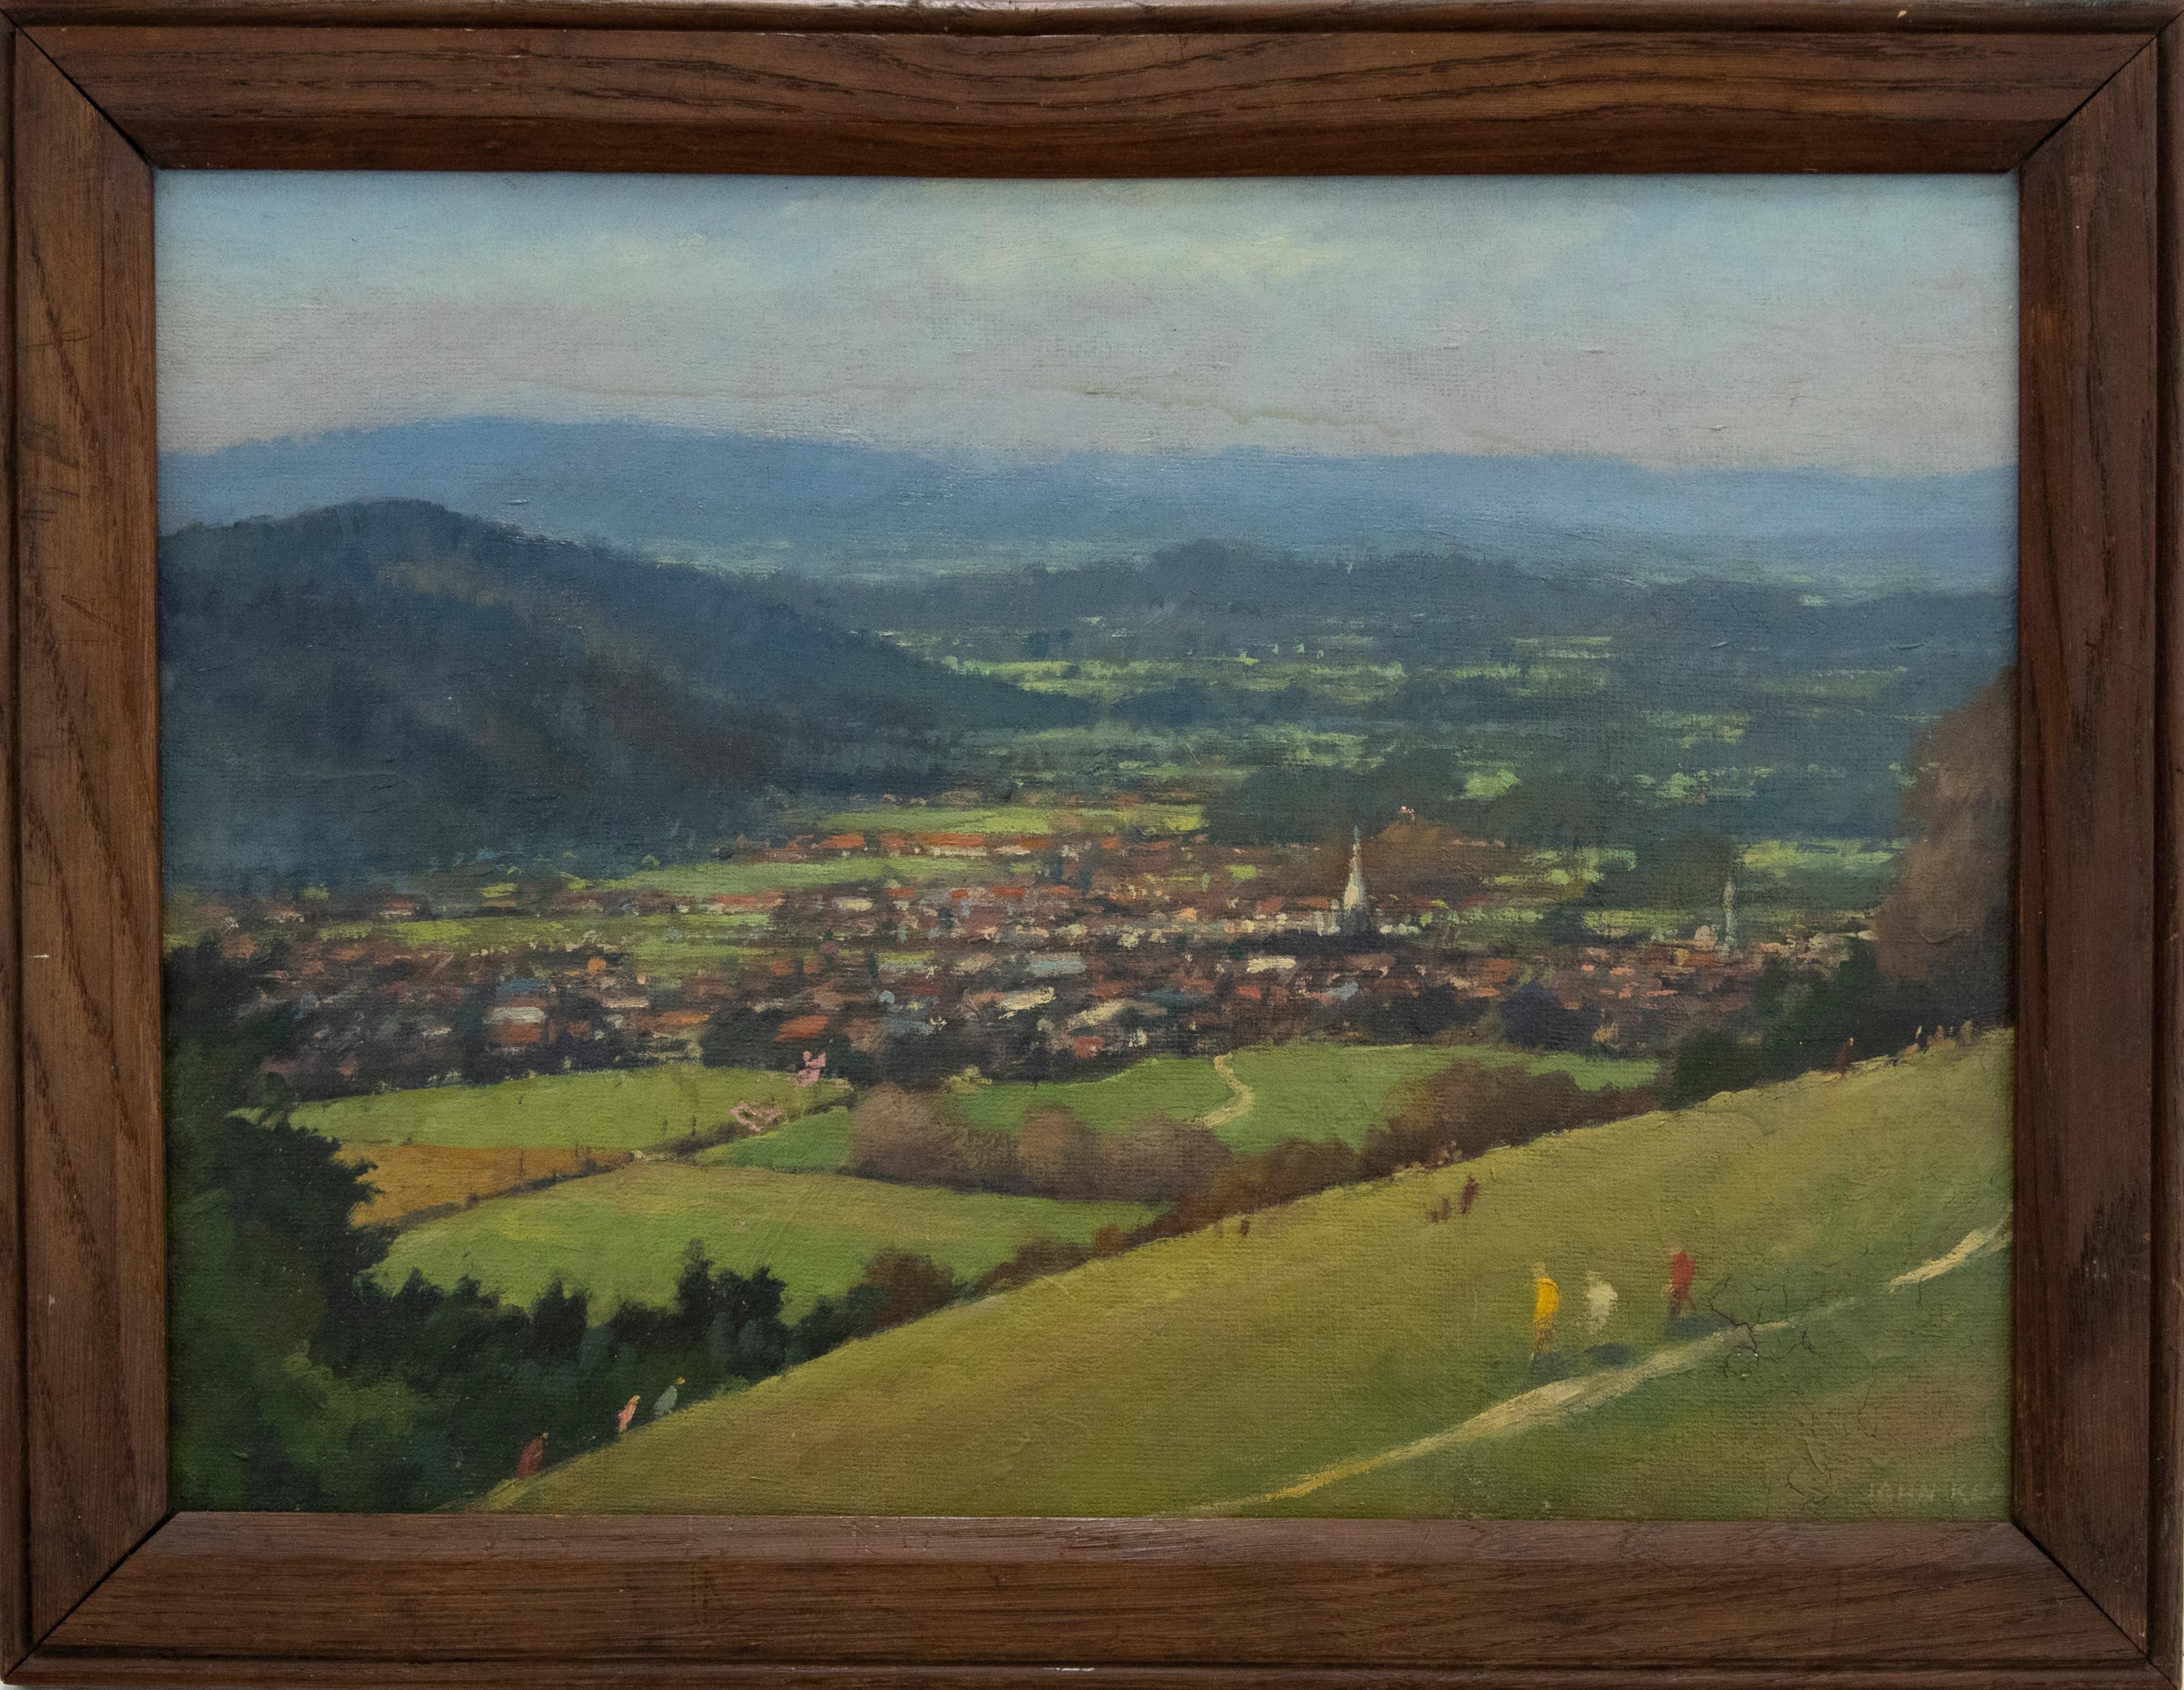 A delightful panoramic landscape of a small English village. Figures walk up and down a steep hill in the foreground while mountains surround the composition. Well presented in a simple wood frame. Signed to the lower right. On canvas board.